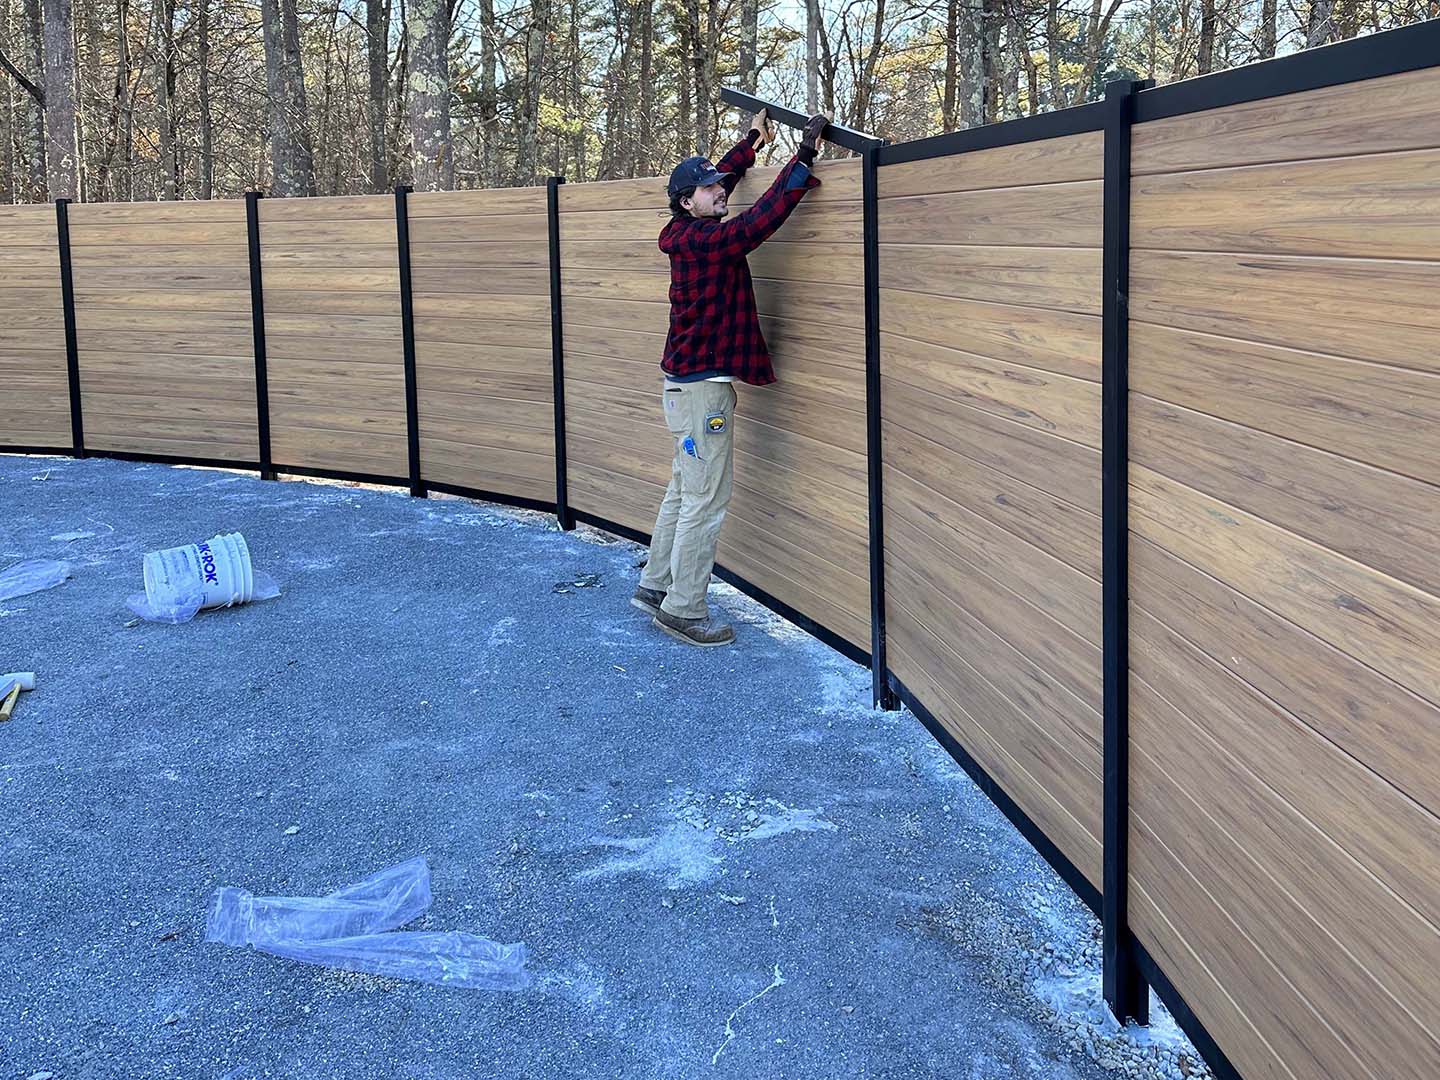 Metheun MA fence contractors installing wood privacy fence